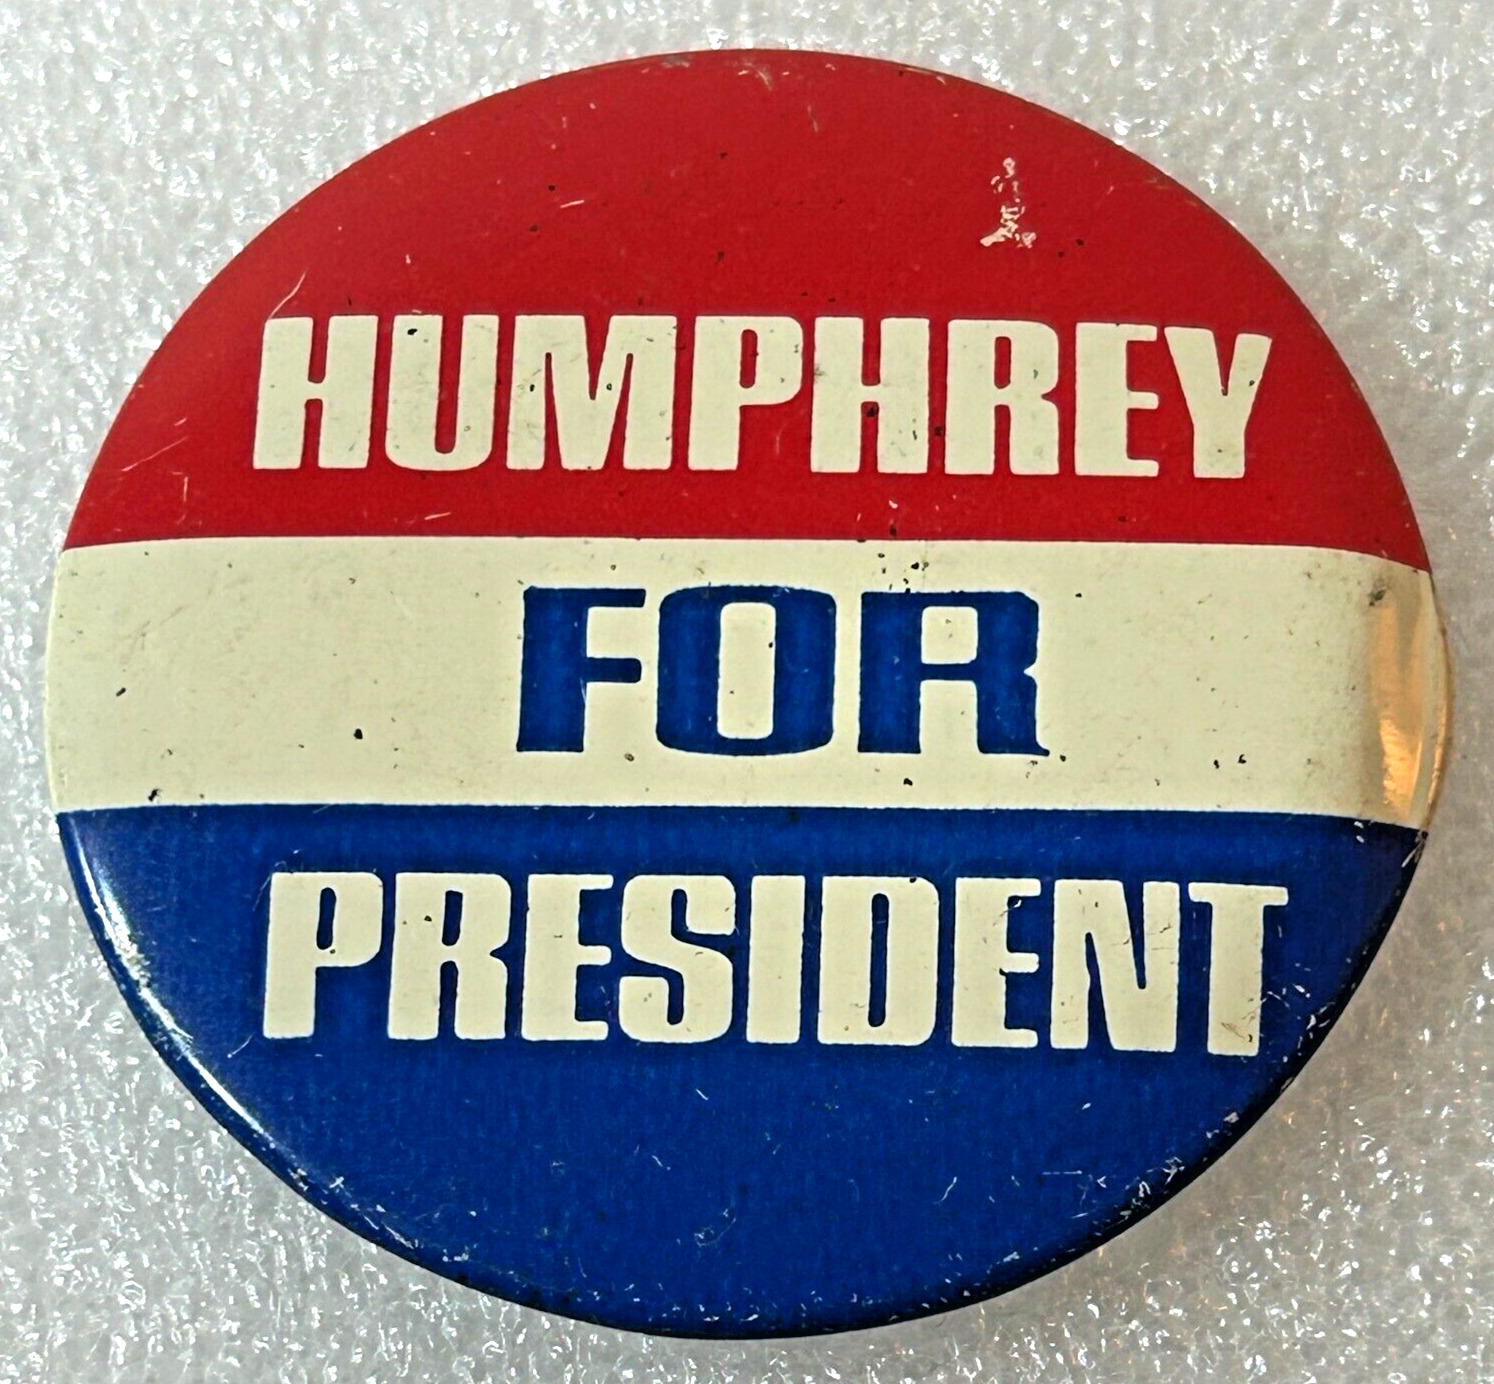 Vintage 1968 Hubert Humphrey For President Campaign Pin Button